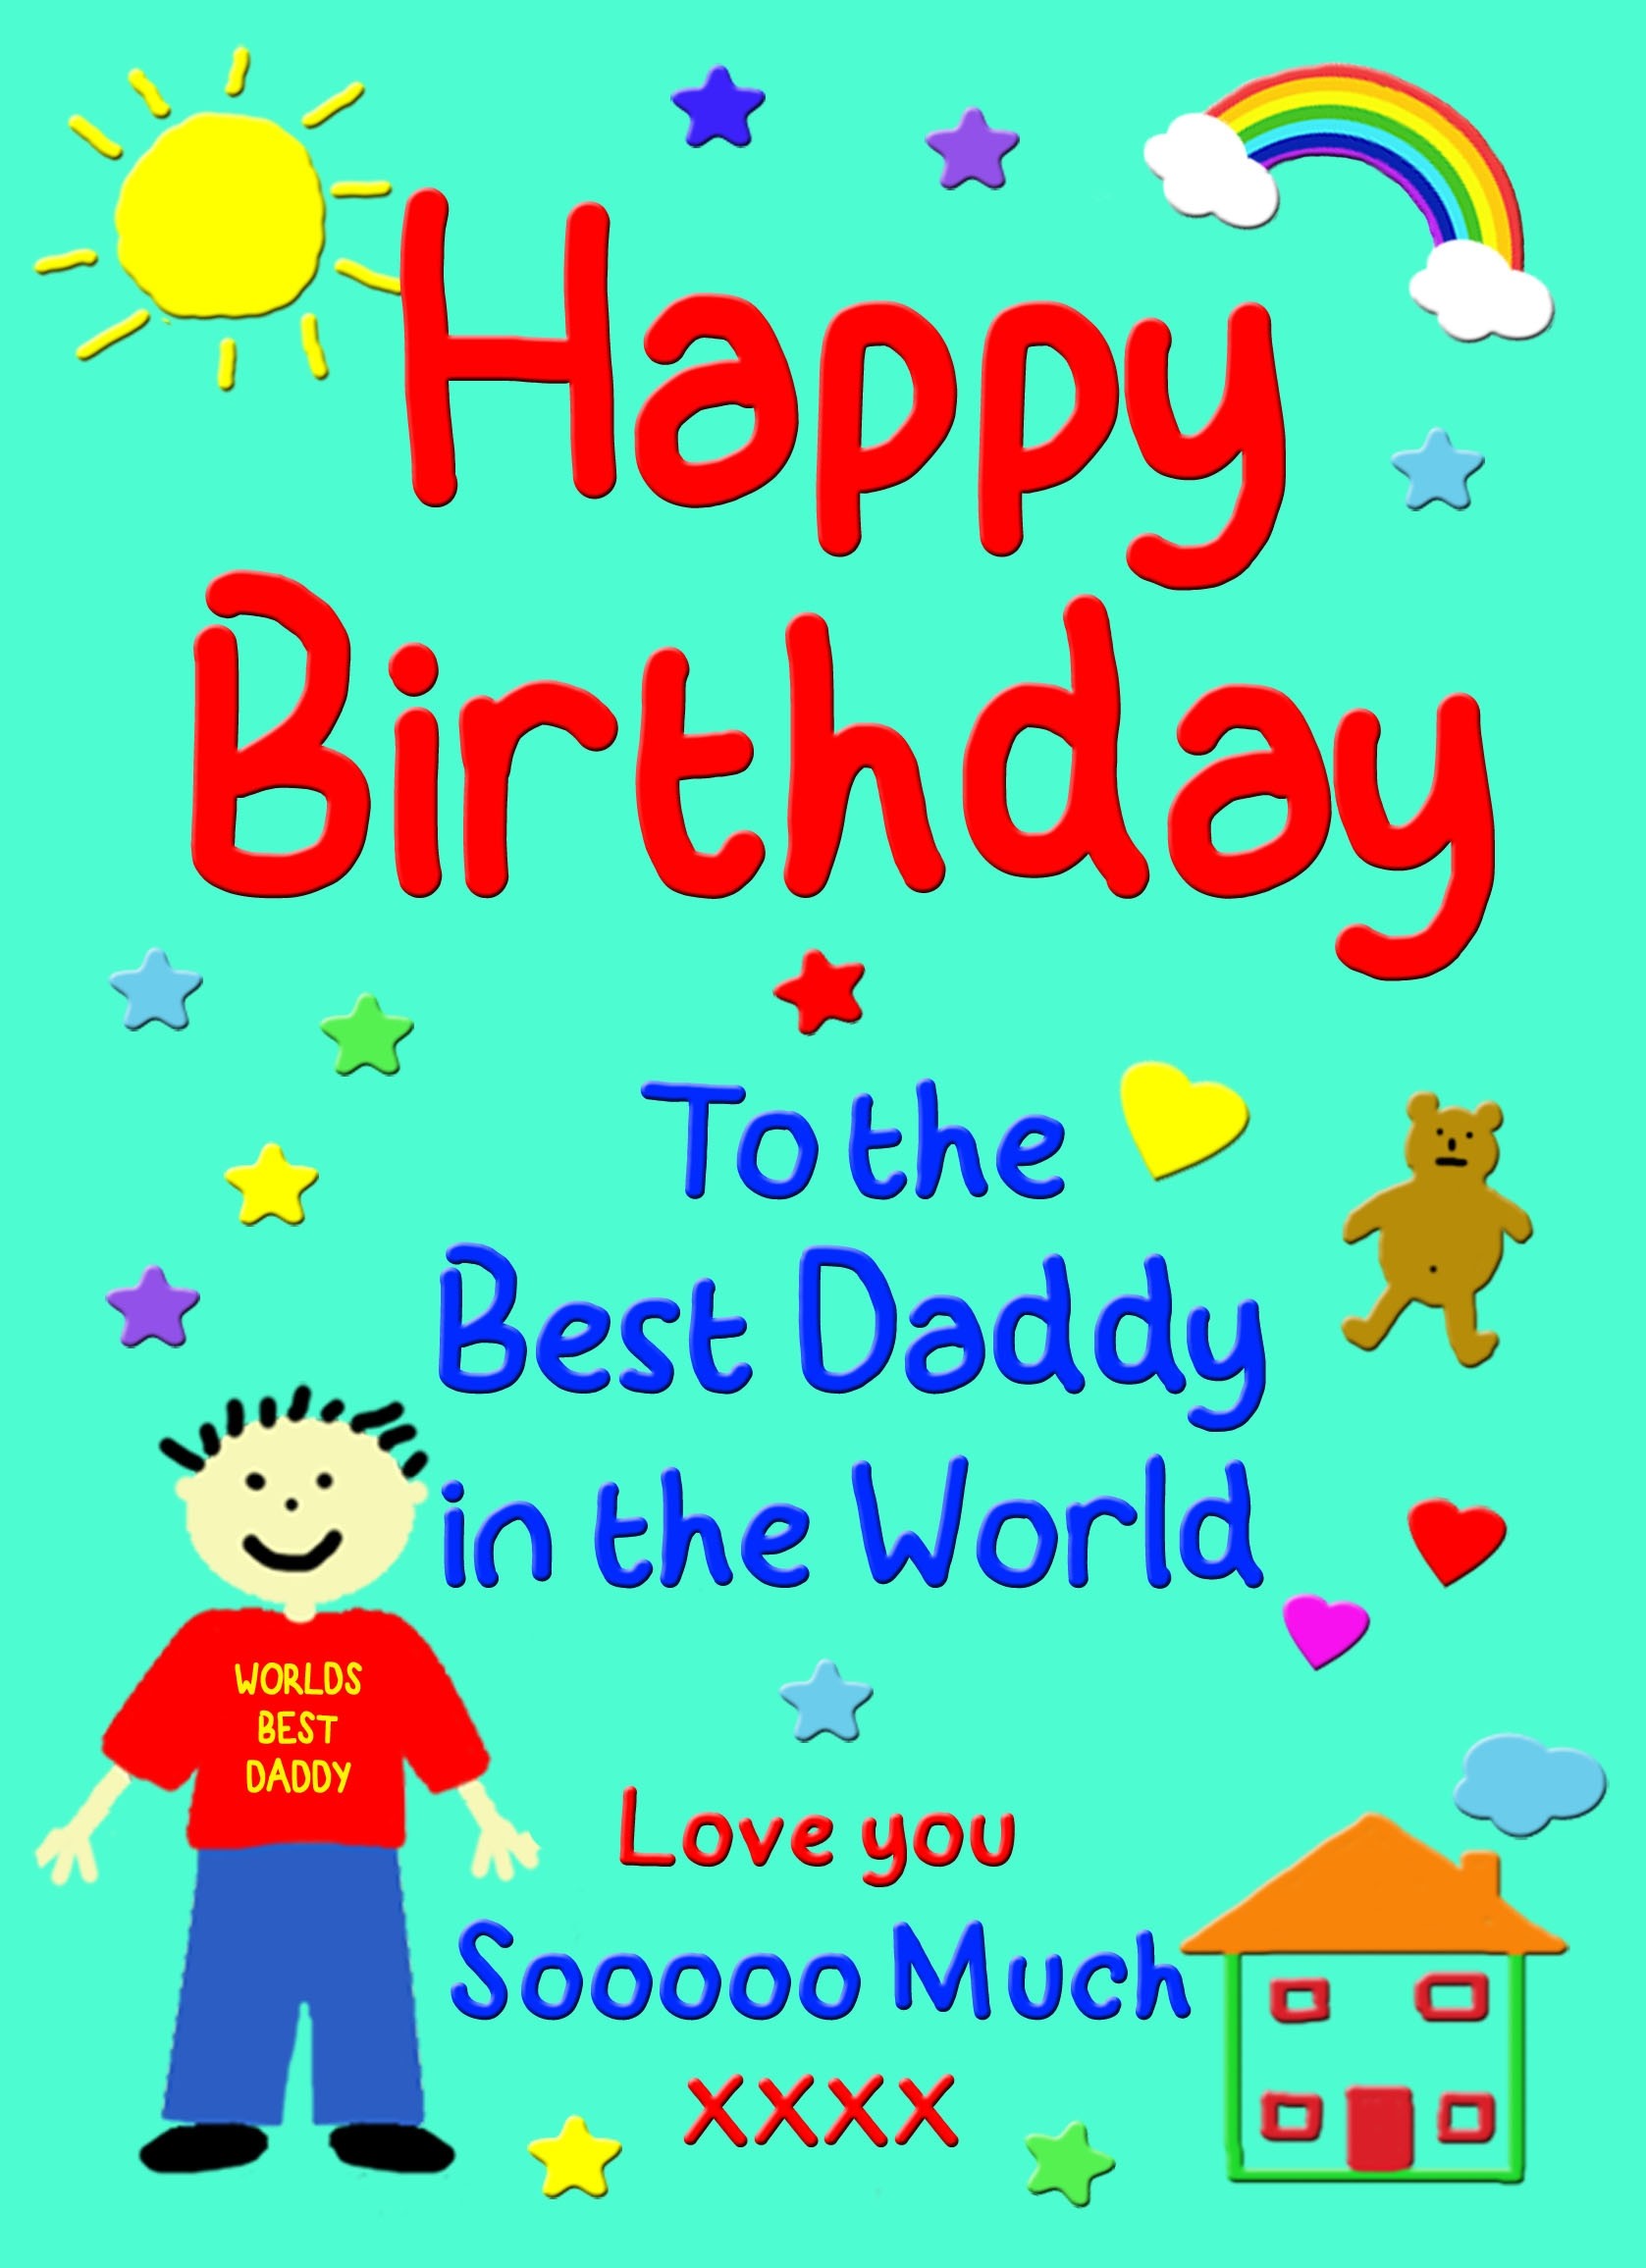 from The Kids Birthday Card (Daddy, Green)